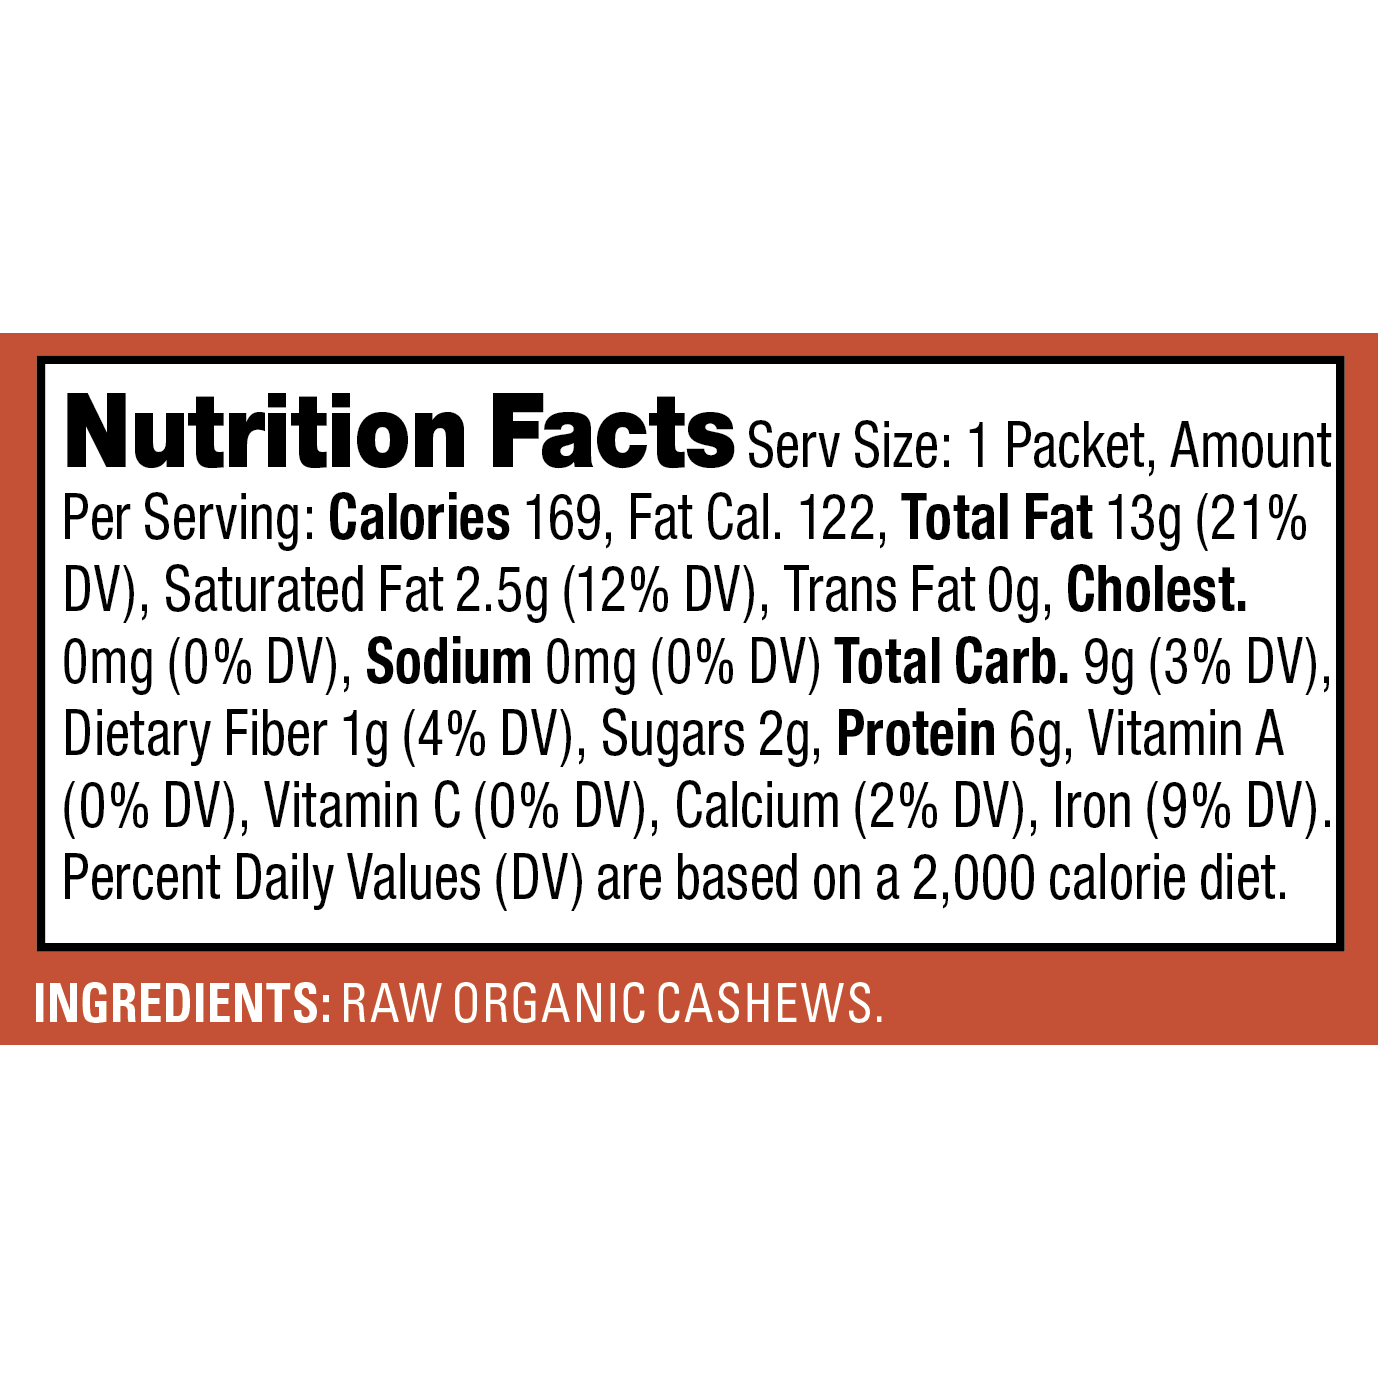 Nutrition facts panel for the Artisana Organic Cashew Butter Pouch